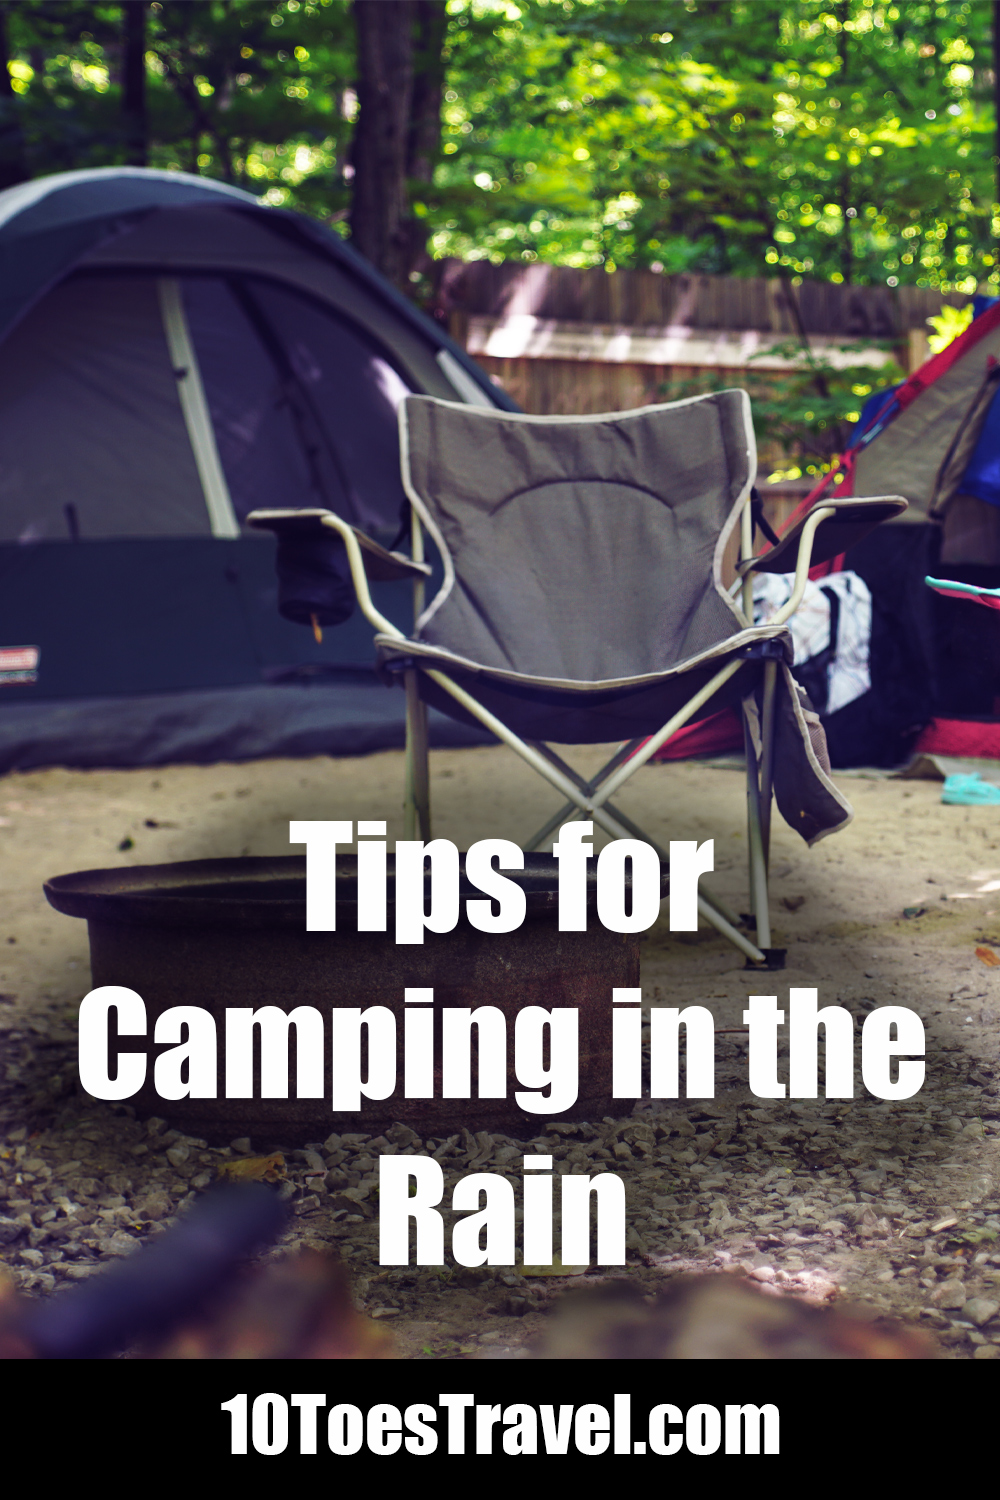 Tips for camping in the rain pinterest image